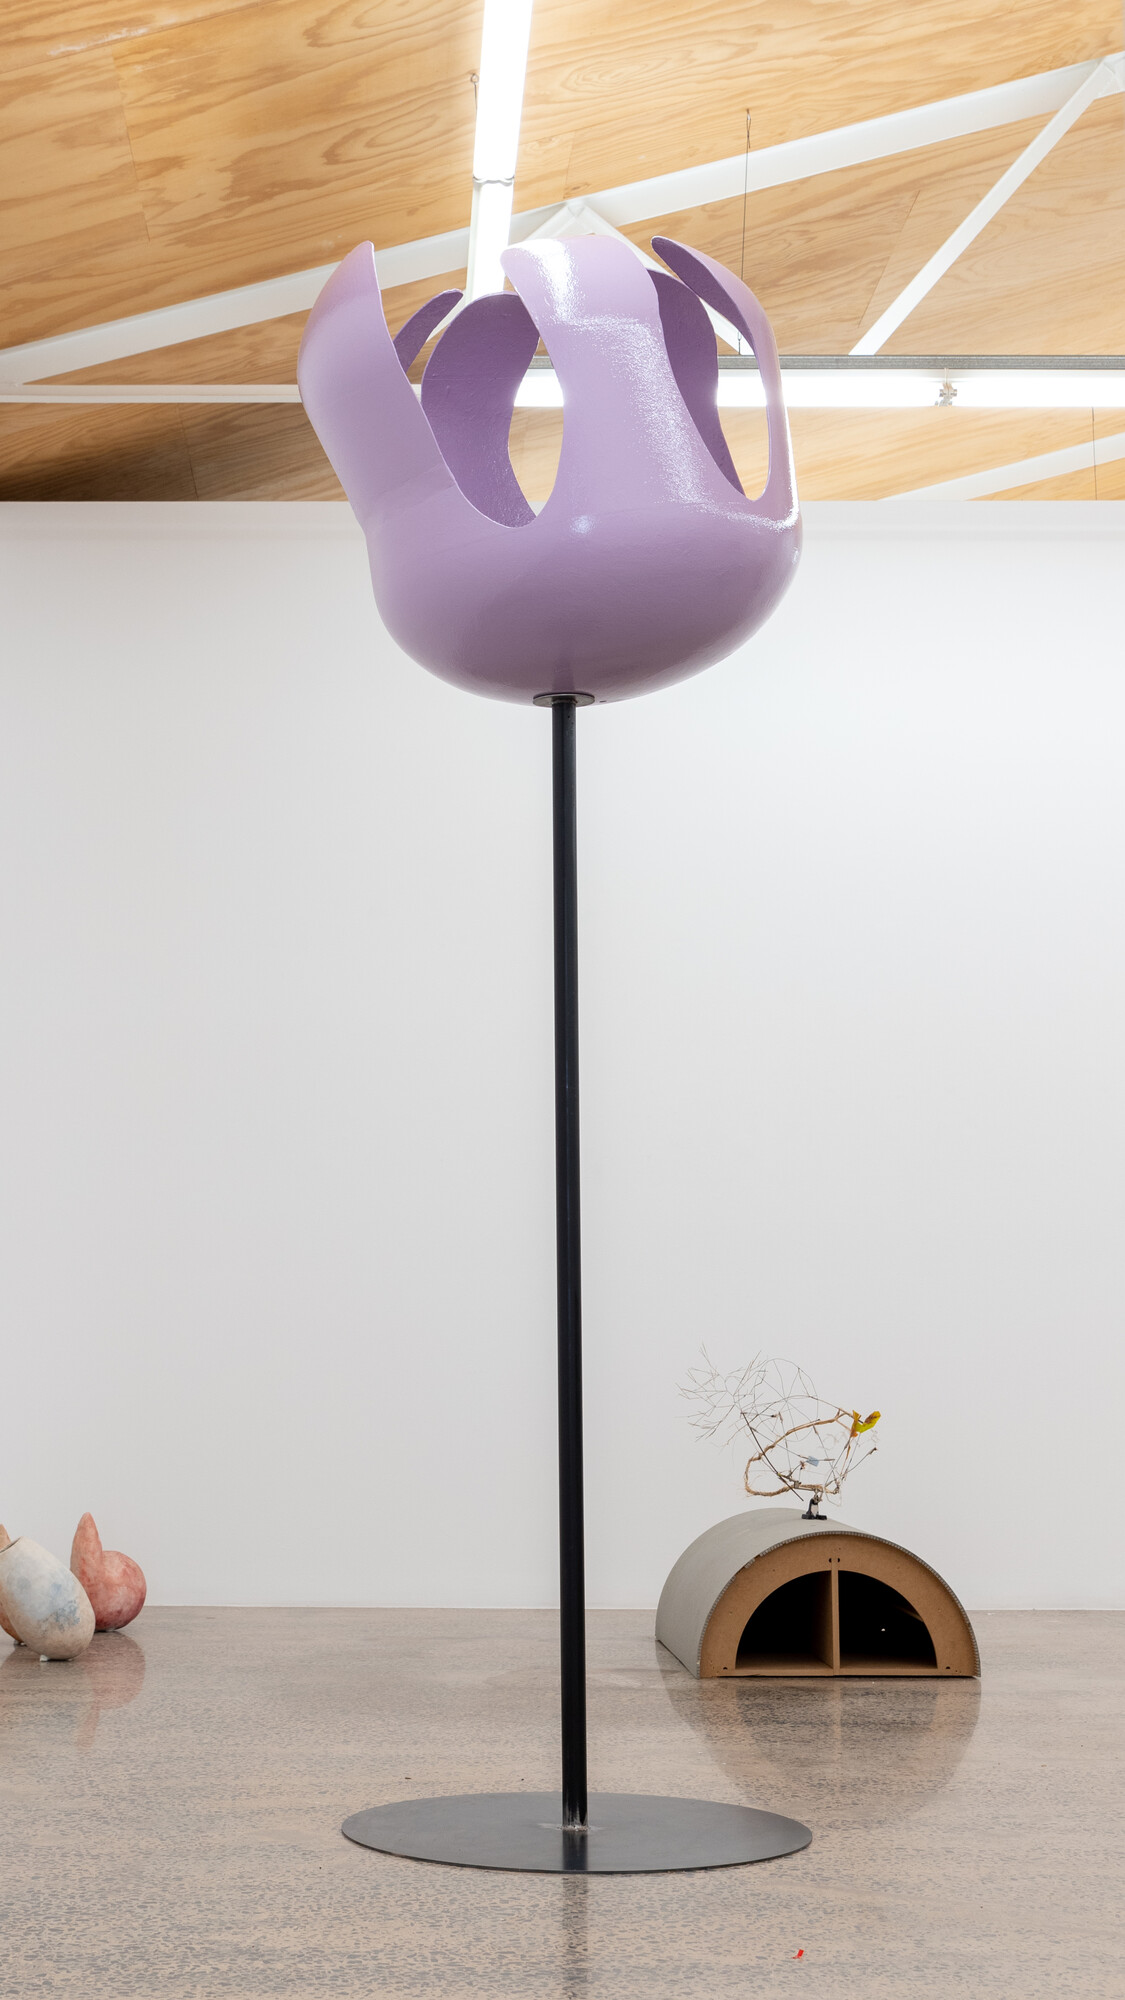 Isadora Vaughan, <em>A nature seen beyond belief, instead of a moderately accurate fish tank</em>, 2023, fibreglass, steel, paint 250.0 x 70.0 x 70.0 cm. Photo courtesy the artist and STATION.